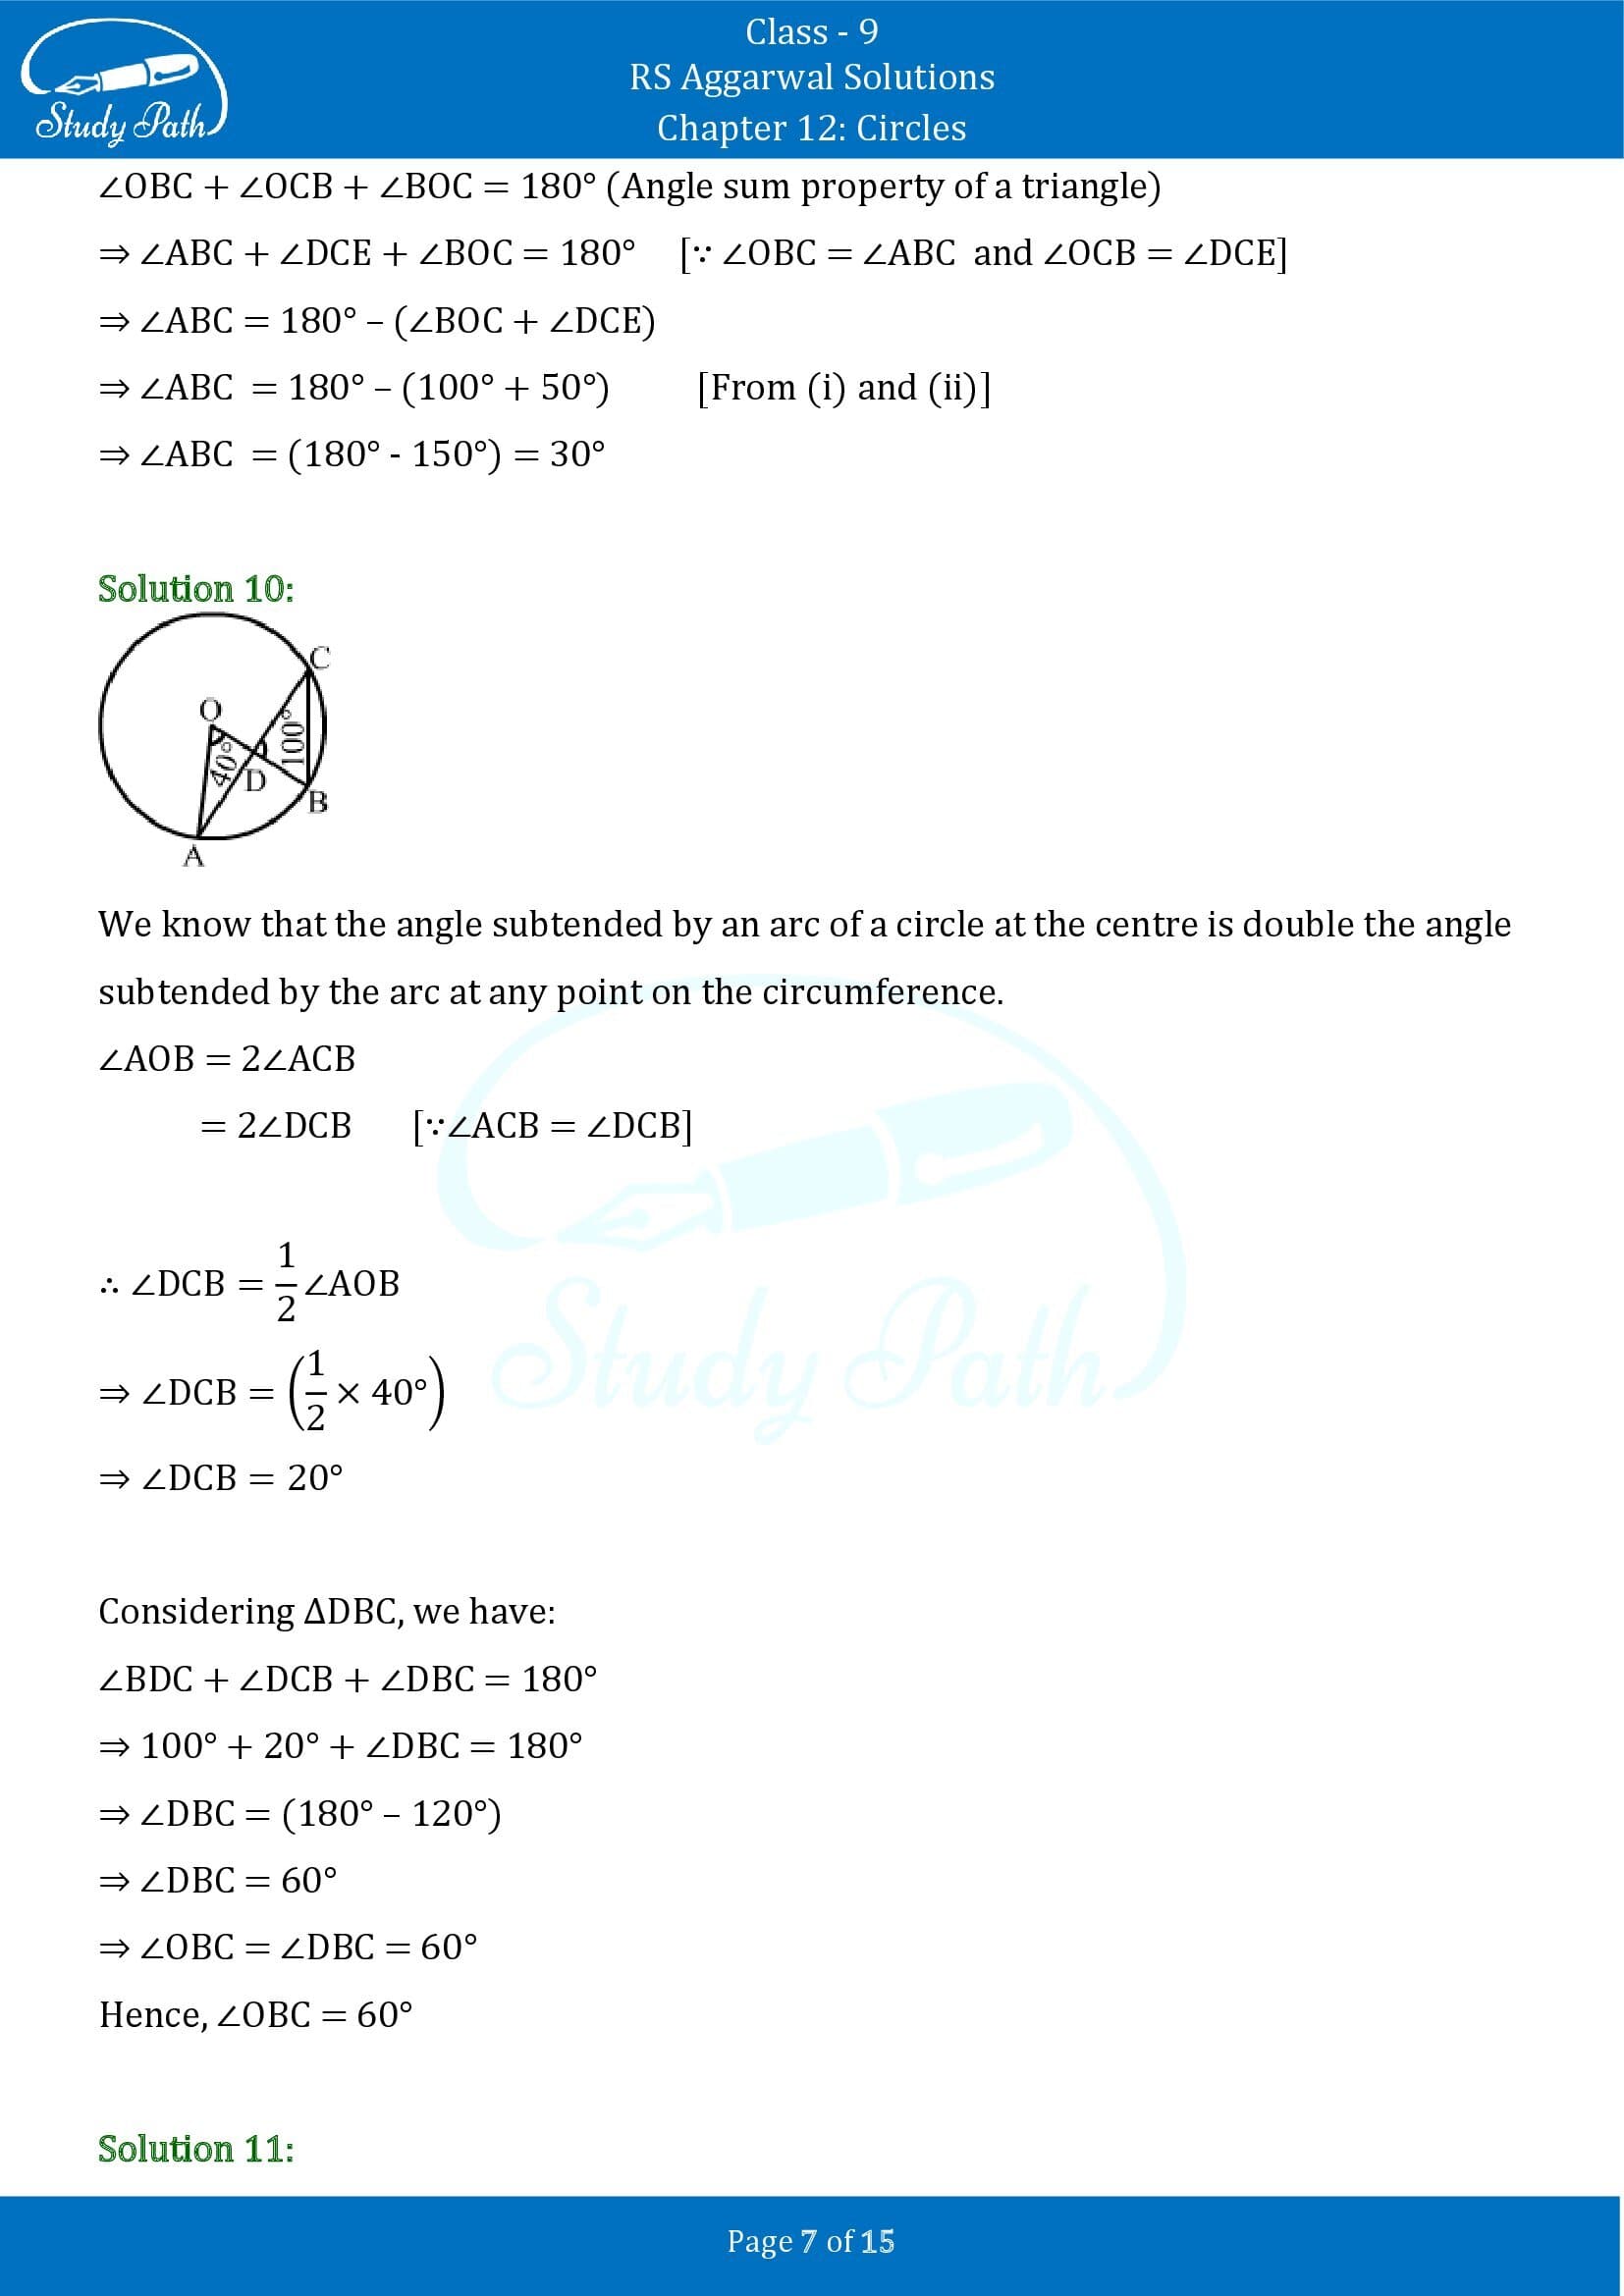 RS Aggarwal Solutions Class 9 Chapter 12 Circles Exercise 12B 00007